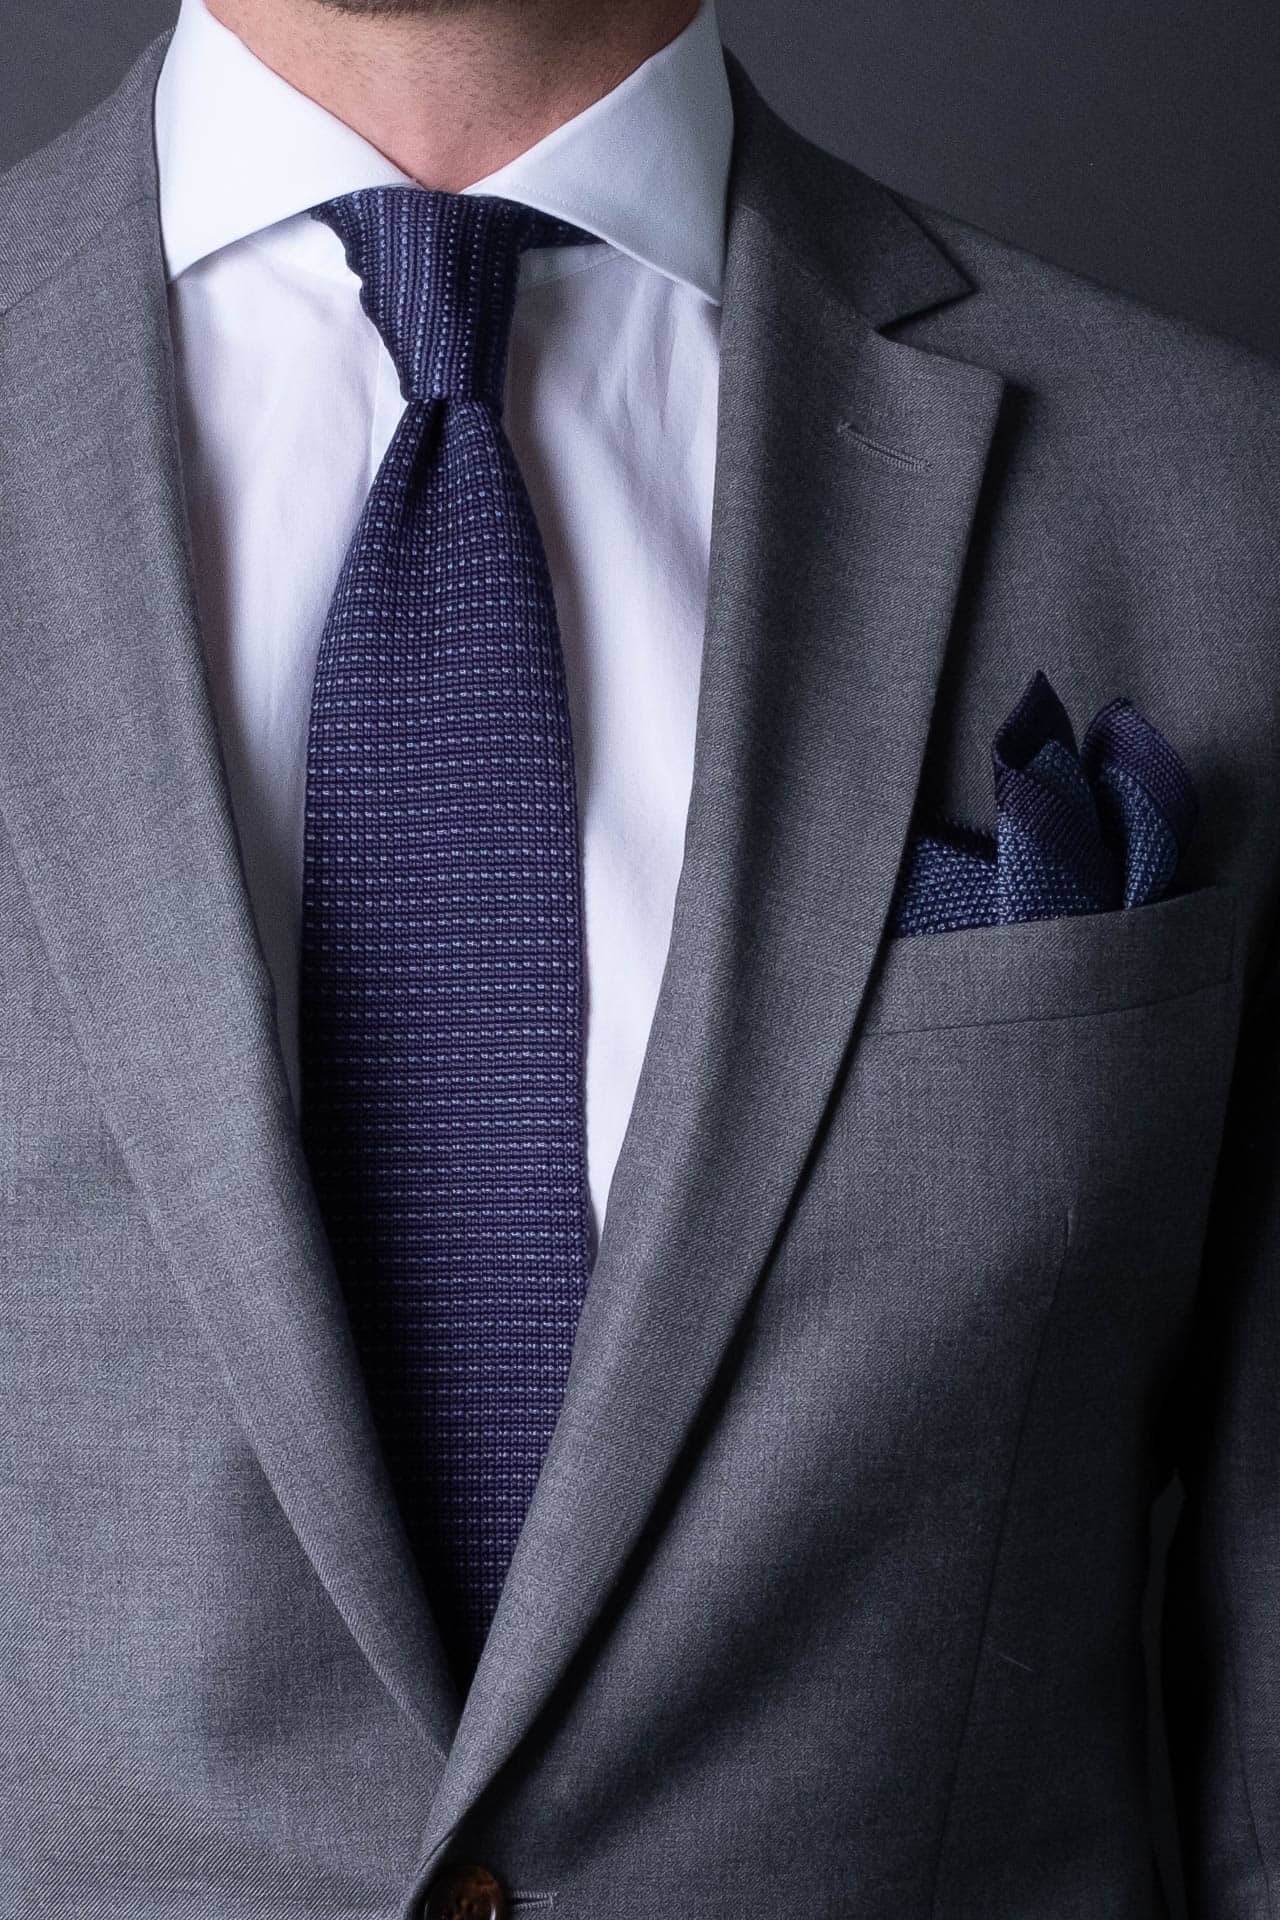 Navy-blue-silk-knitted-tie-with-pointed-tip-made-in-italy-combo-matching-pocket-square